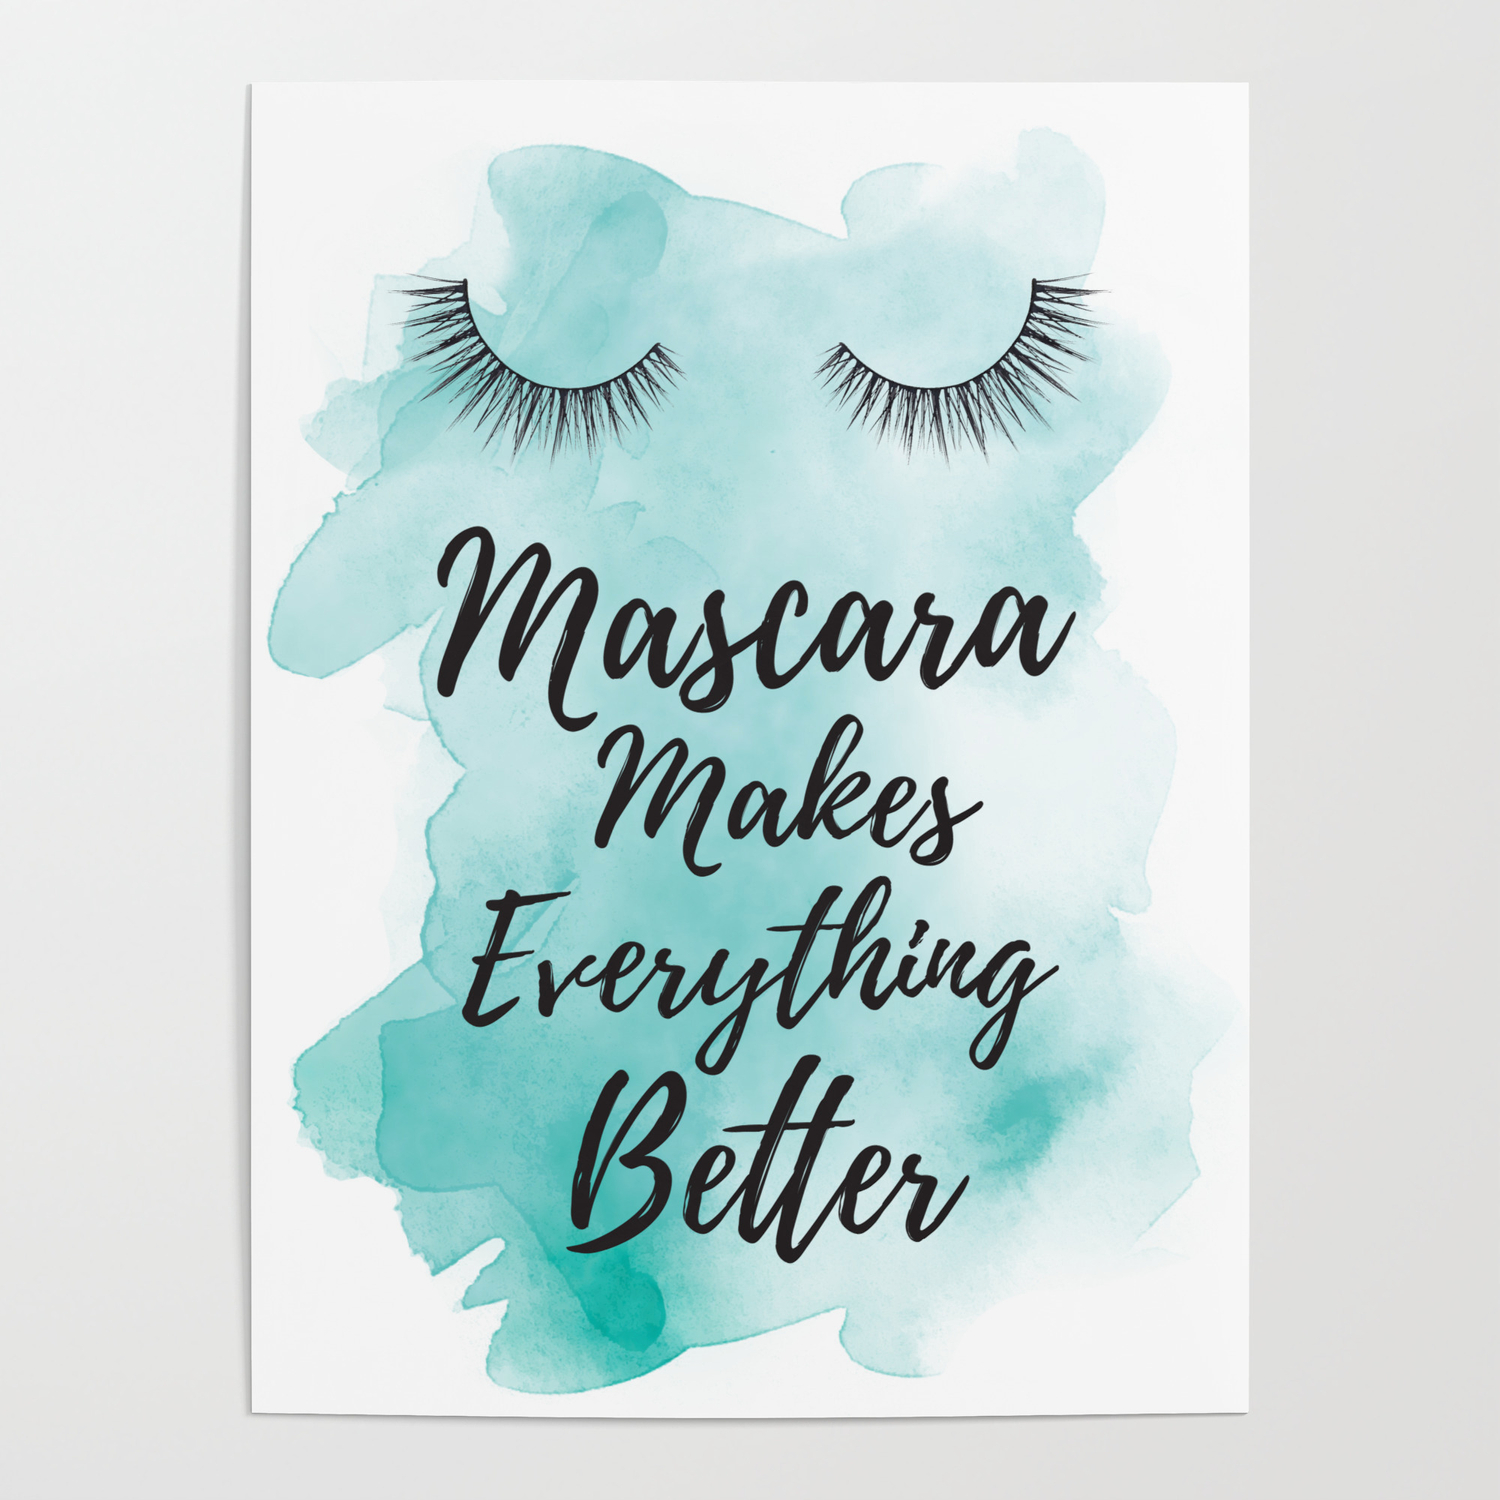 Fashion Print Eyelashes Print Makeup Print Beauty Quote Makeup Quote Bathroom Art Lashes Poster Mascara Makes Everything Better